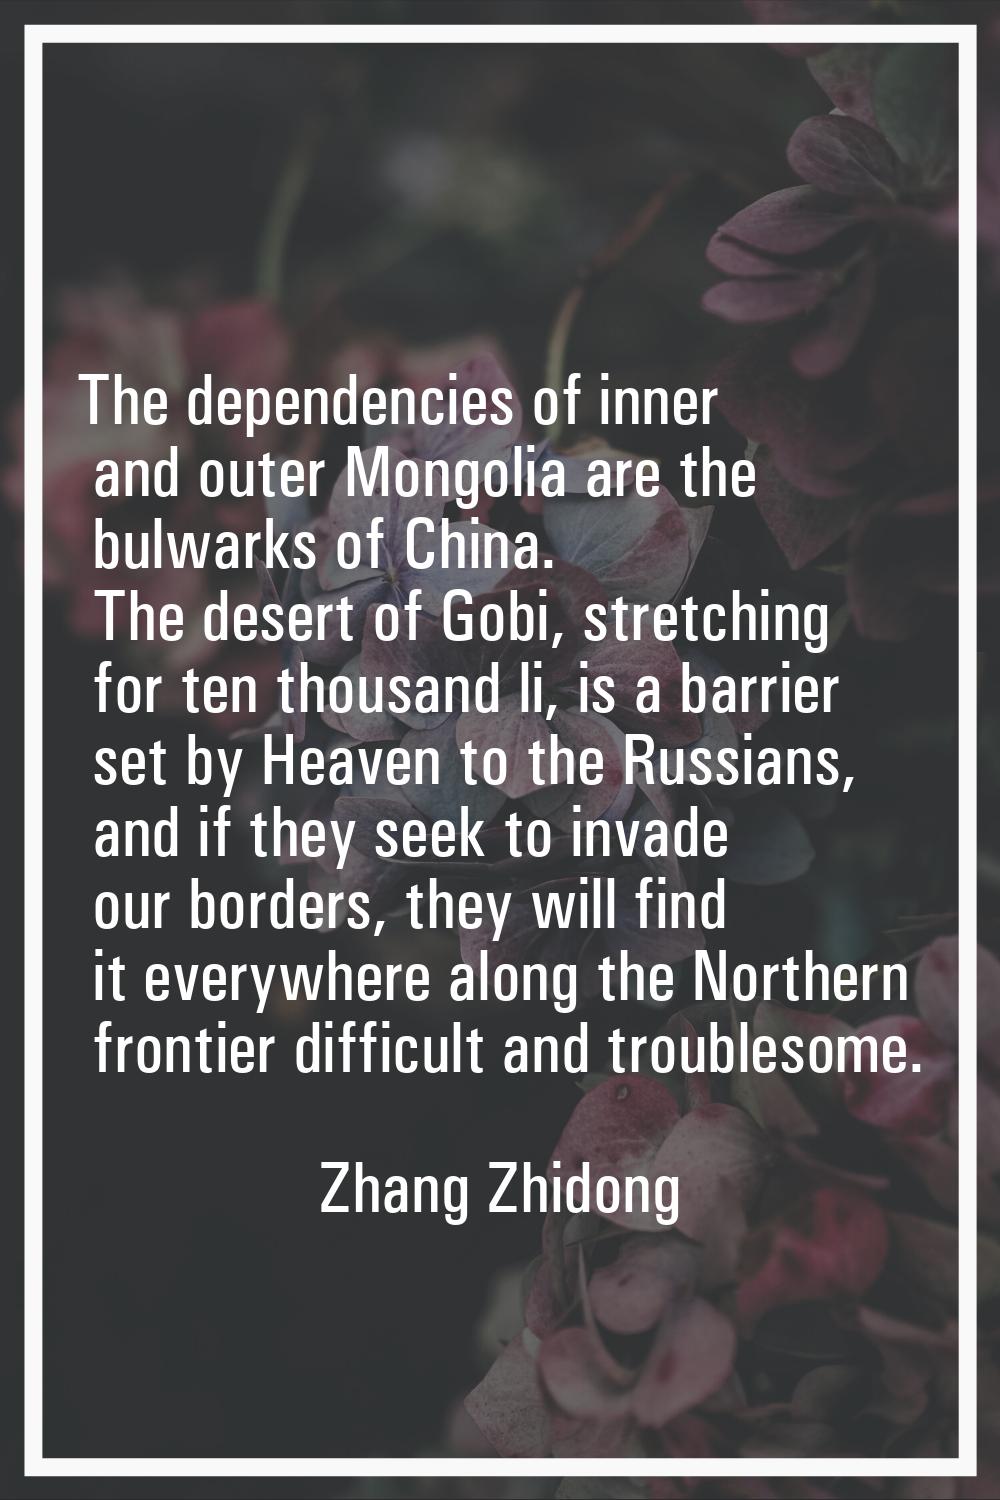 The dependencies of inner and outer Mongolia are the bulwarks of China. The desert of Gobi, stretch